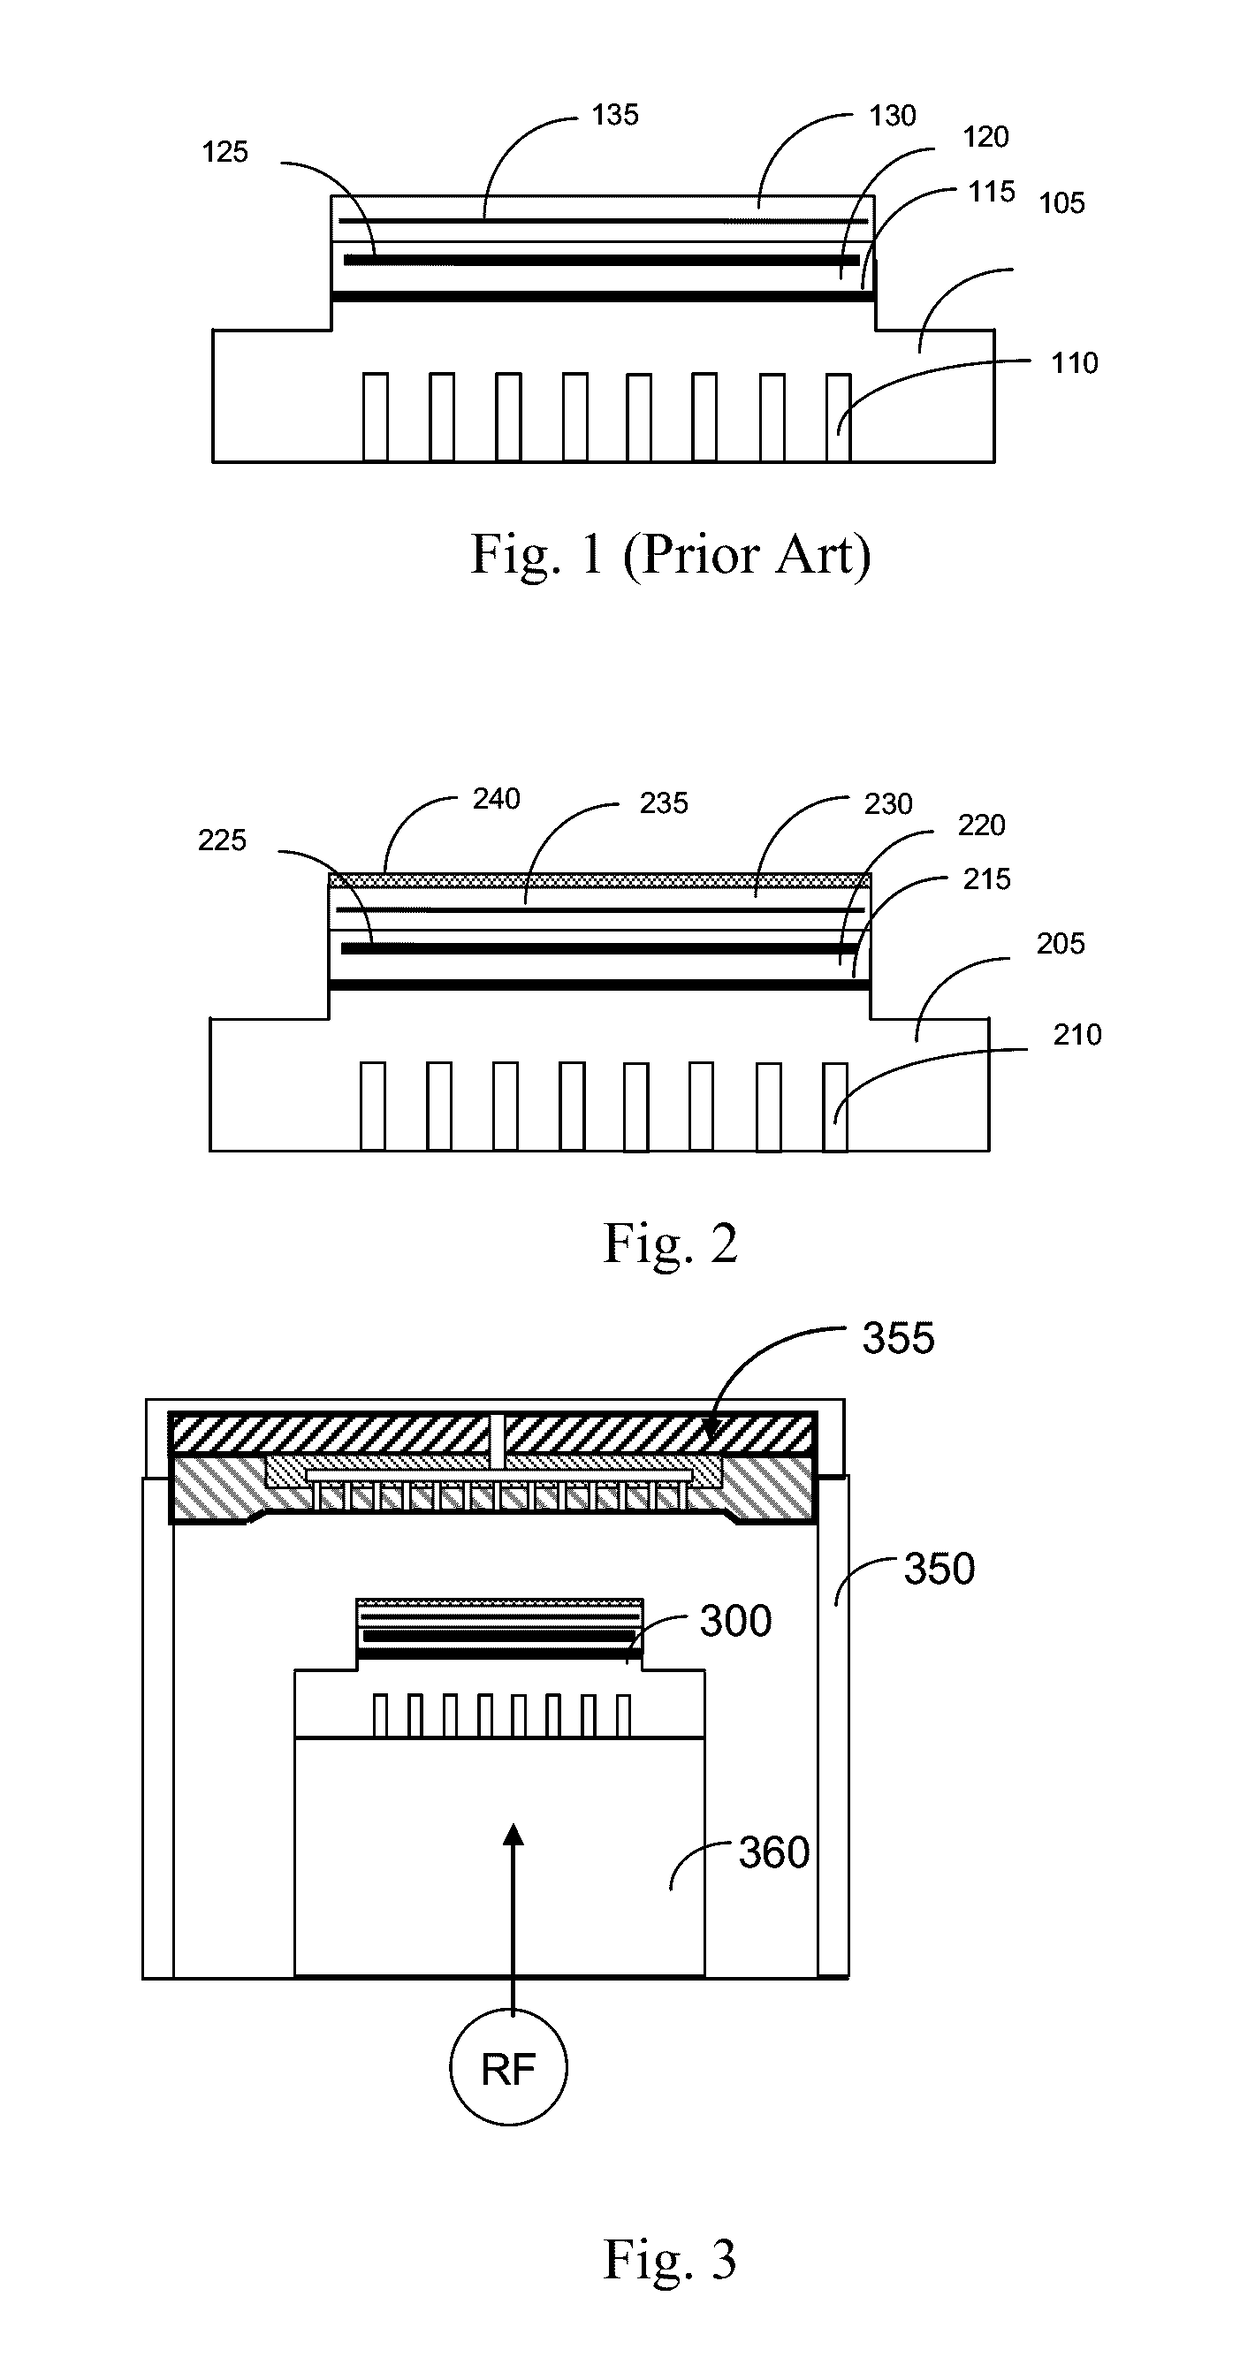 Performance enhancement of coating packaged ESC for semiconductor apparatus